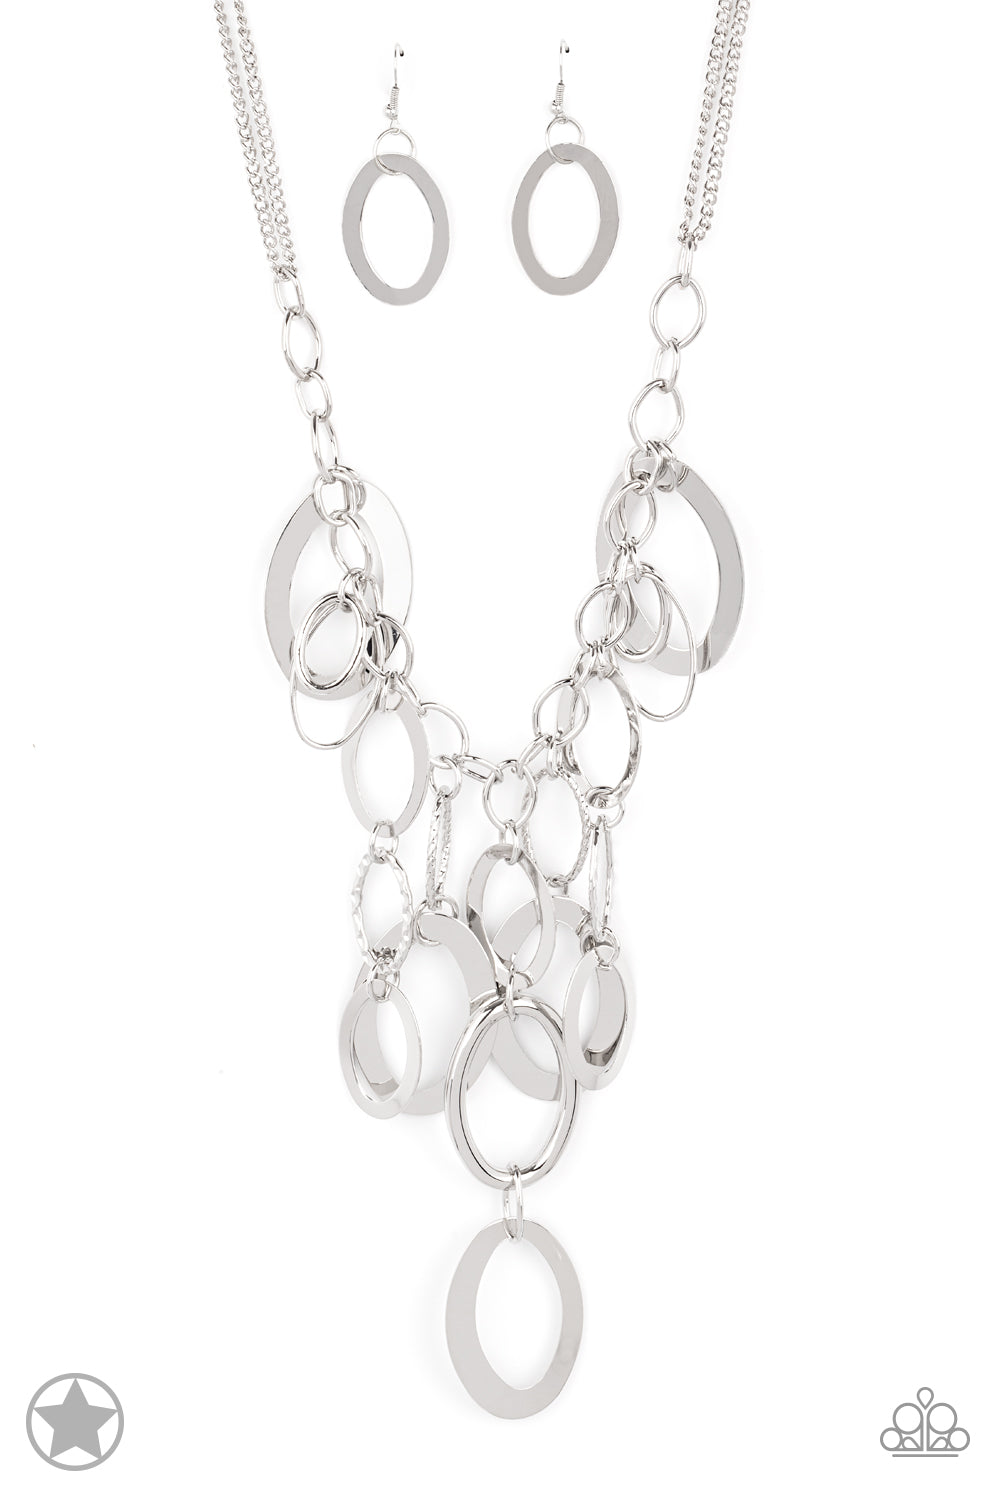 A Silver Spell - Silver blockbuster necklace 540